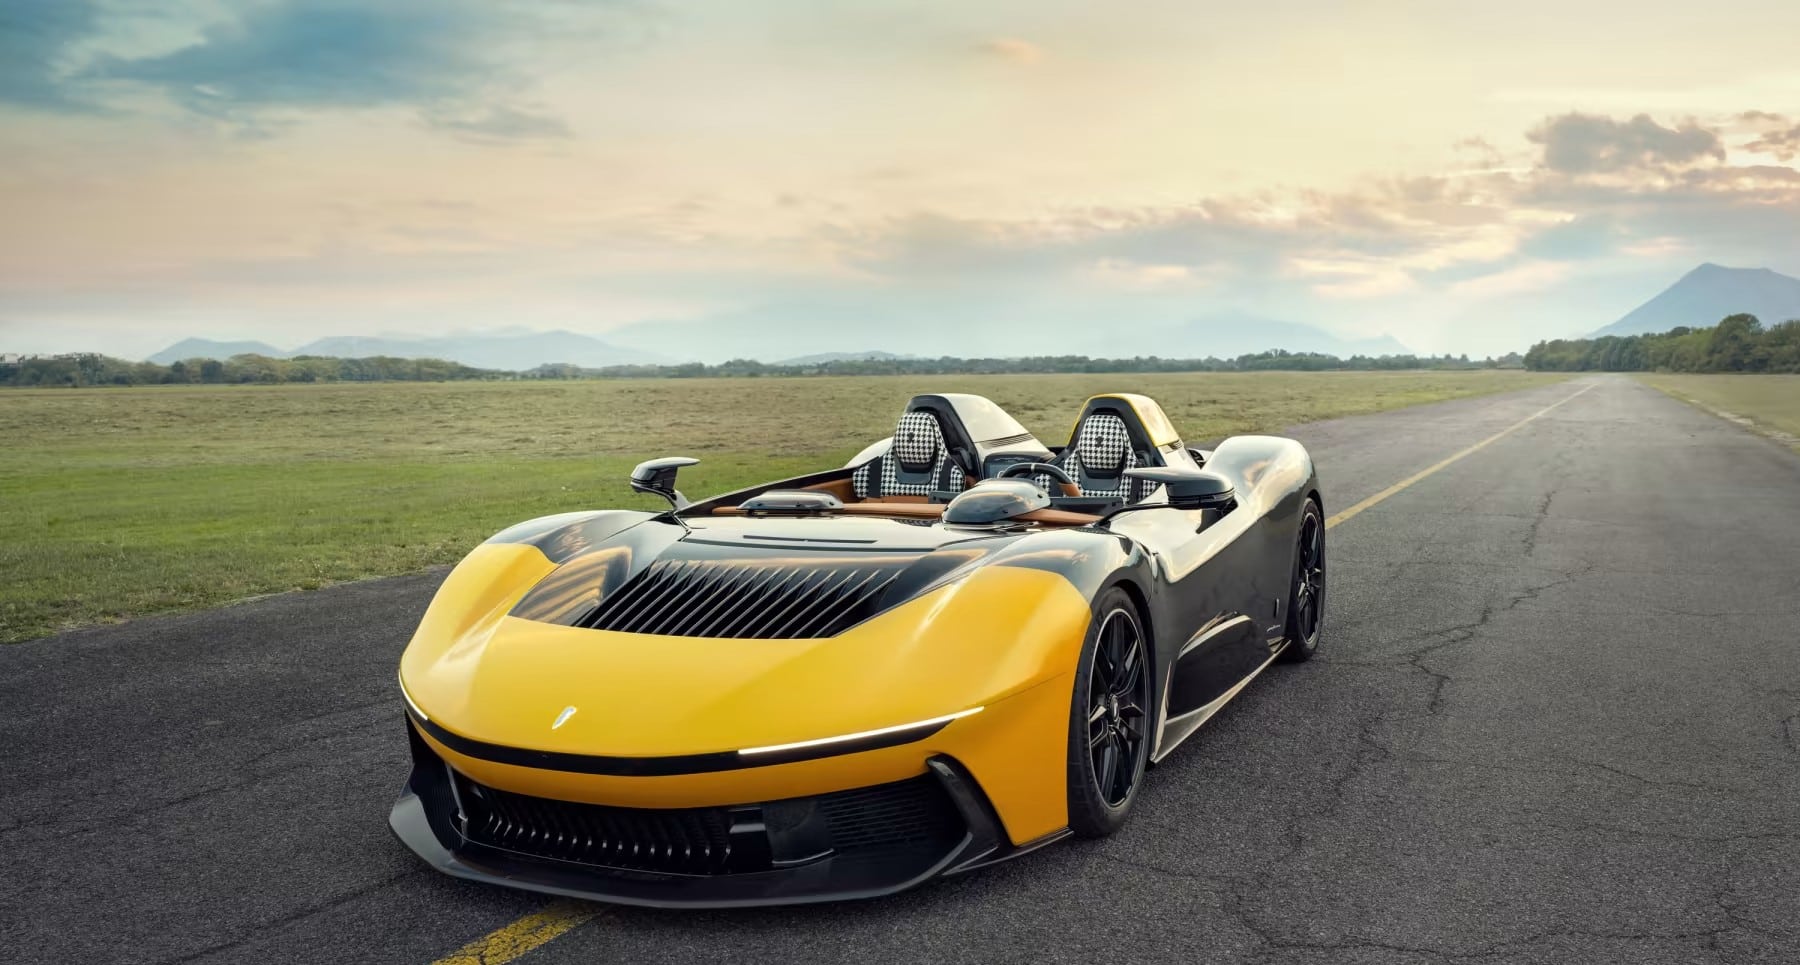 The ‘hypercar’ that will set you back AED 17 million